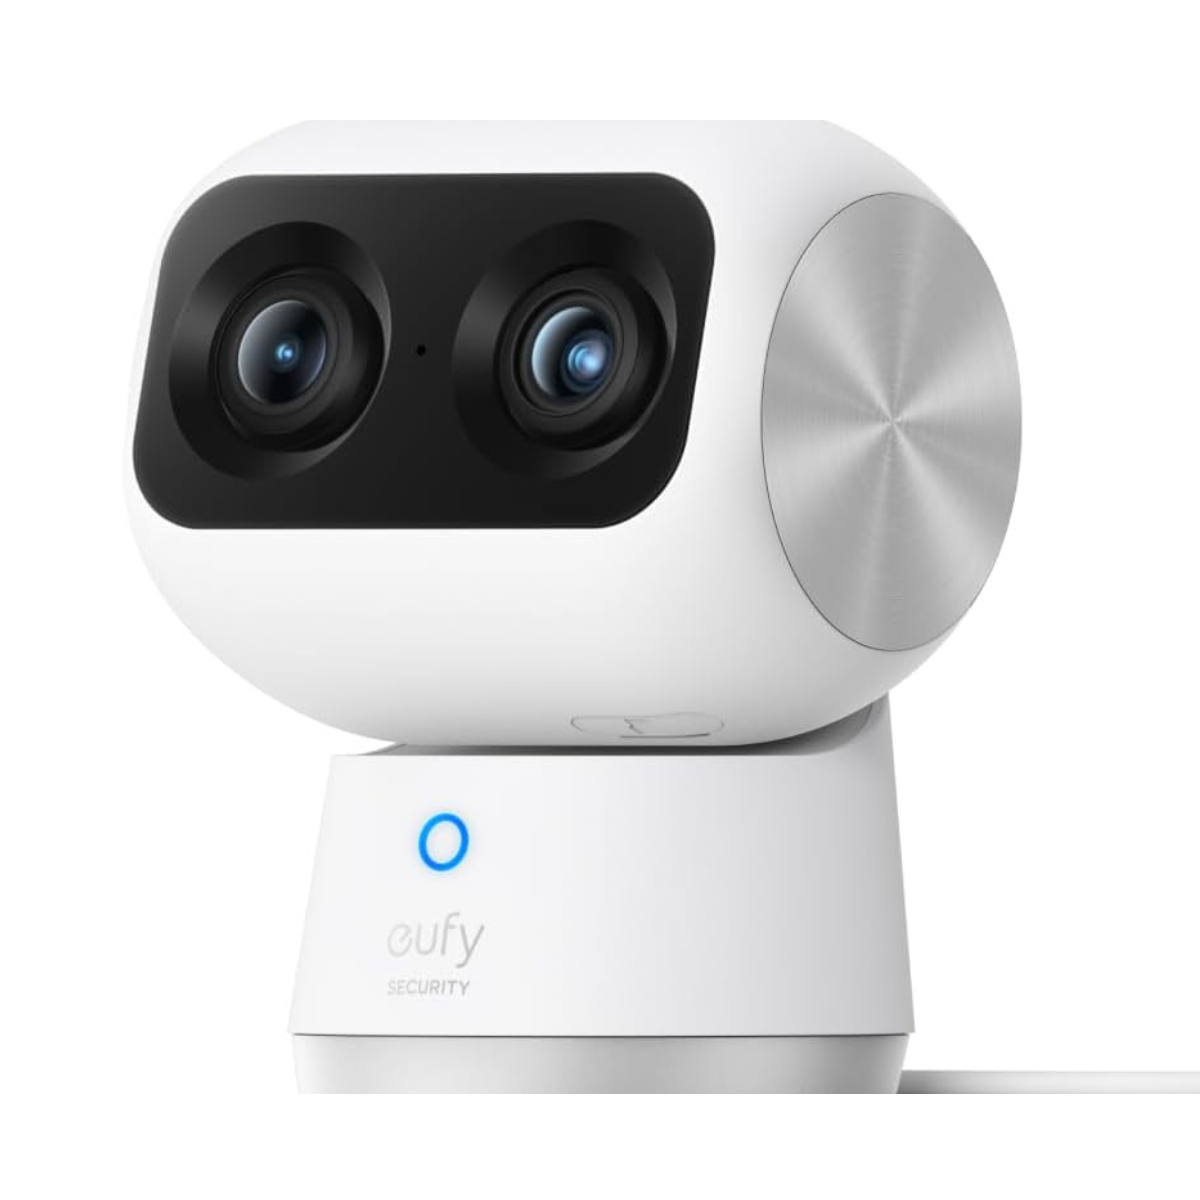 The Eufy Security Indoor Cam S350